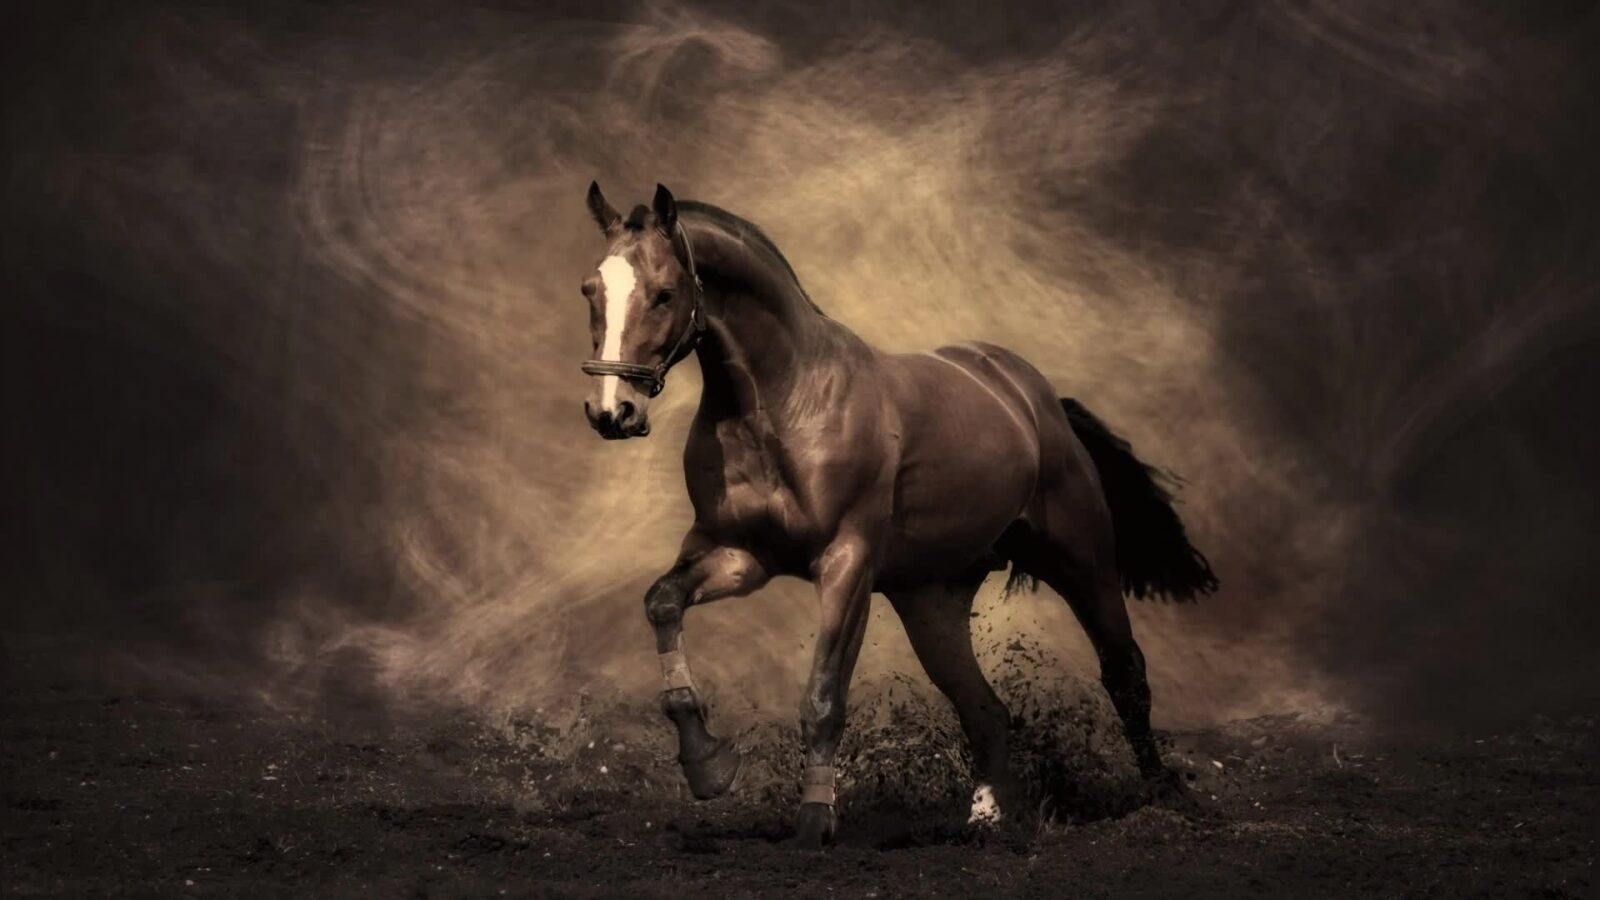 LiveWallpapers4Free.com | Horse Grey Dust Smoke - Free Live Wallpaper